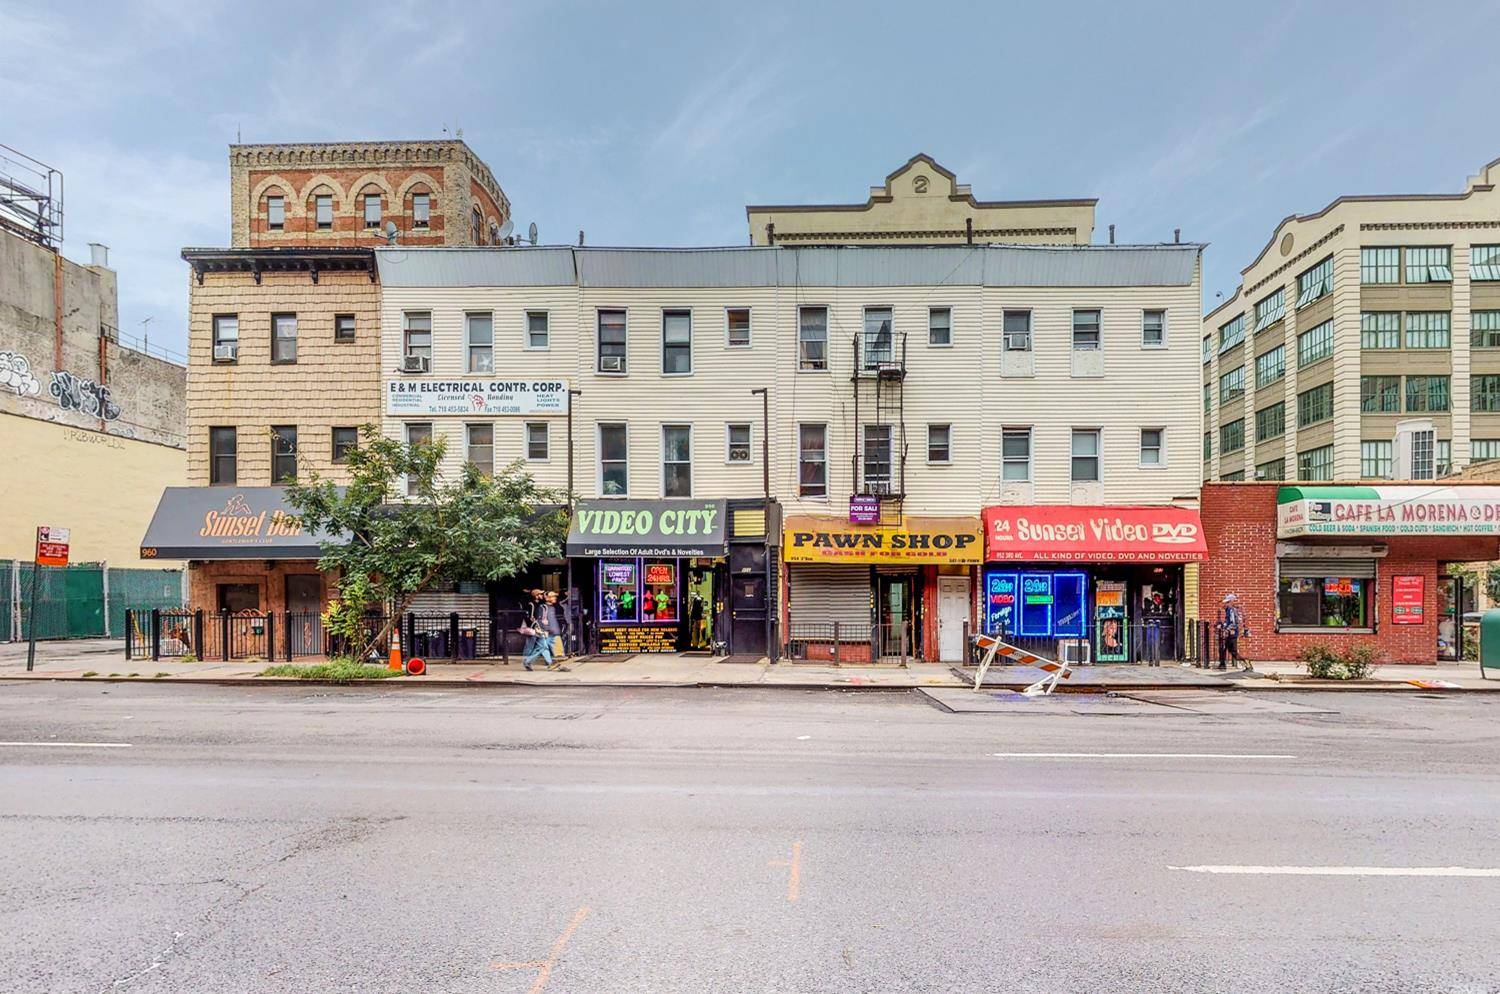 Welcome to 954 3rd ave a multi family mixed use building in the heart of Industry city.